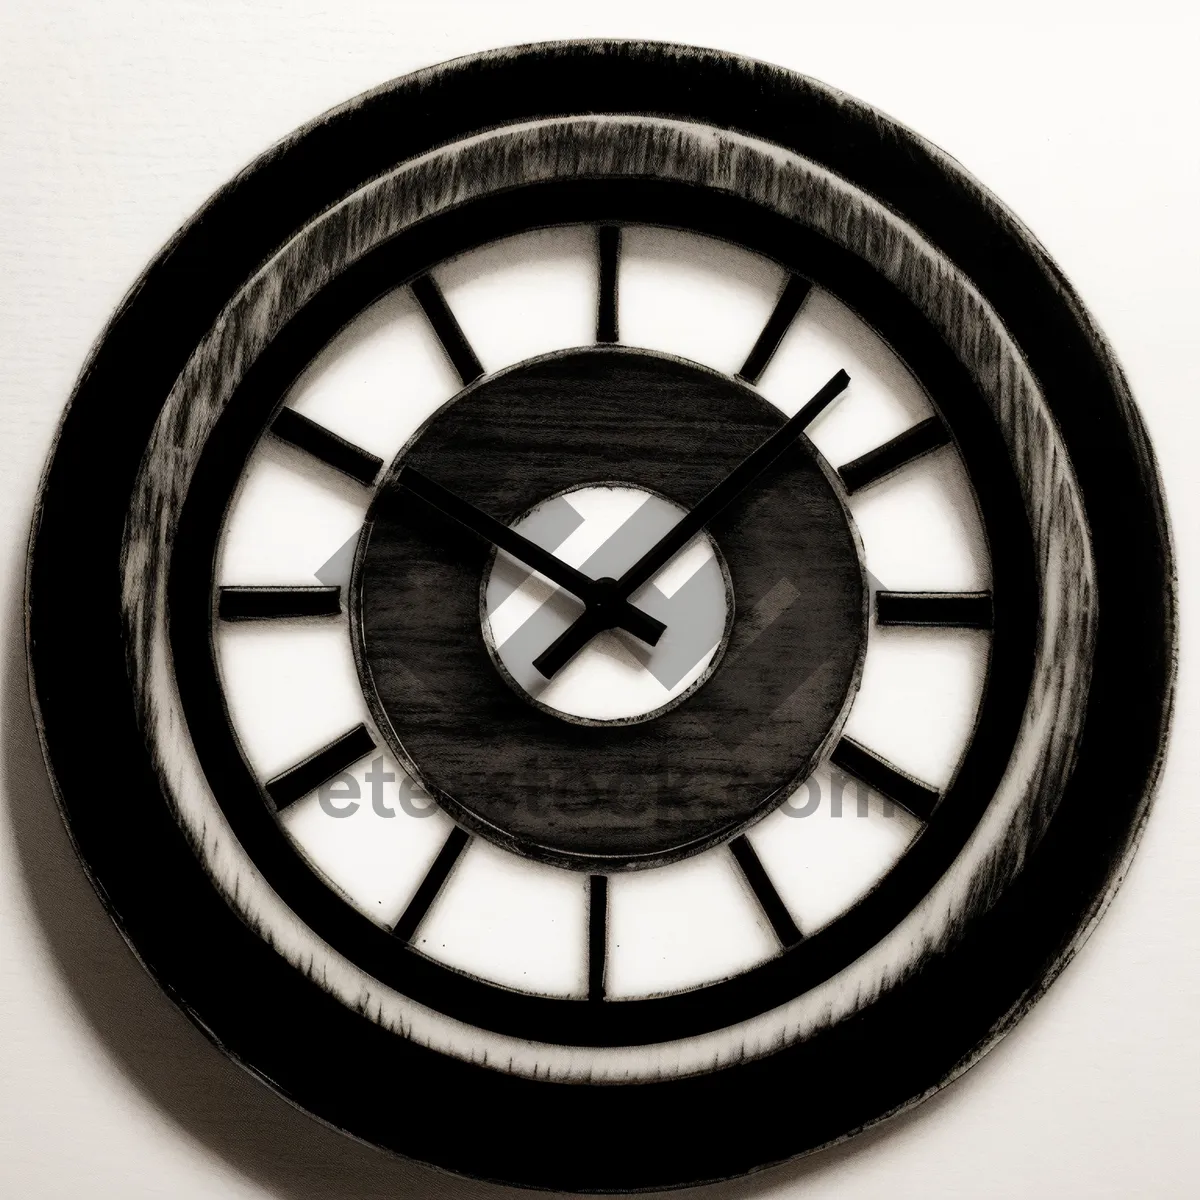 Picture of Vintage Analog Wall Clock